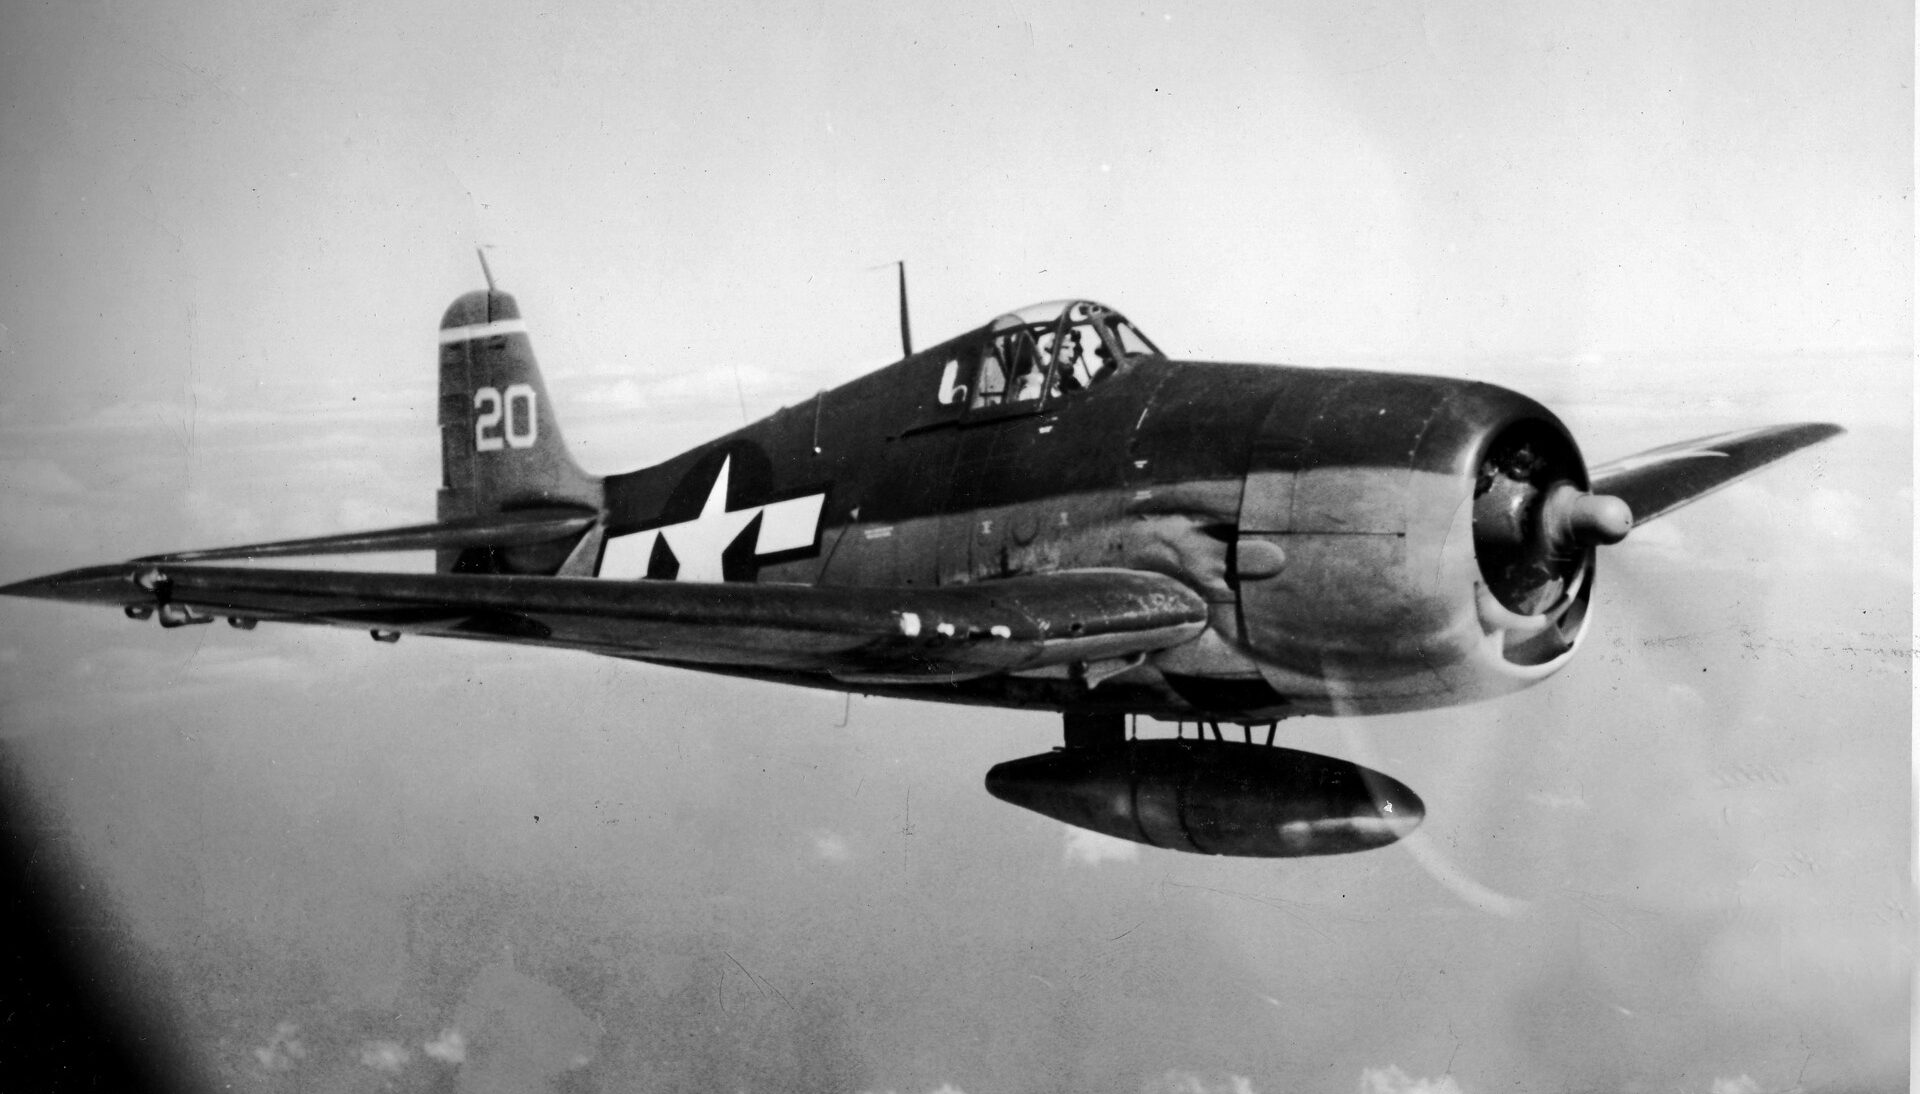 A Grumman F6F Hellcat fighter belonging to Task Force 58 flies over the Pacific Ocean. The Hellcat, superior to the Japanese Mitsubishi A6 M Zero in numerous performance aspects, was a deadly weapon during VF-32’s fighter action over Truk Lagoon in April 1944.